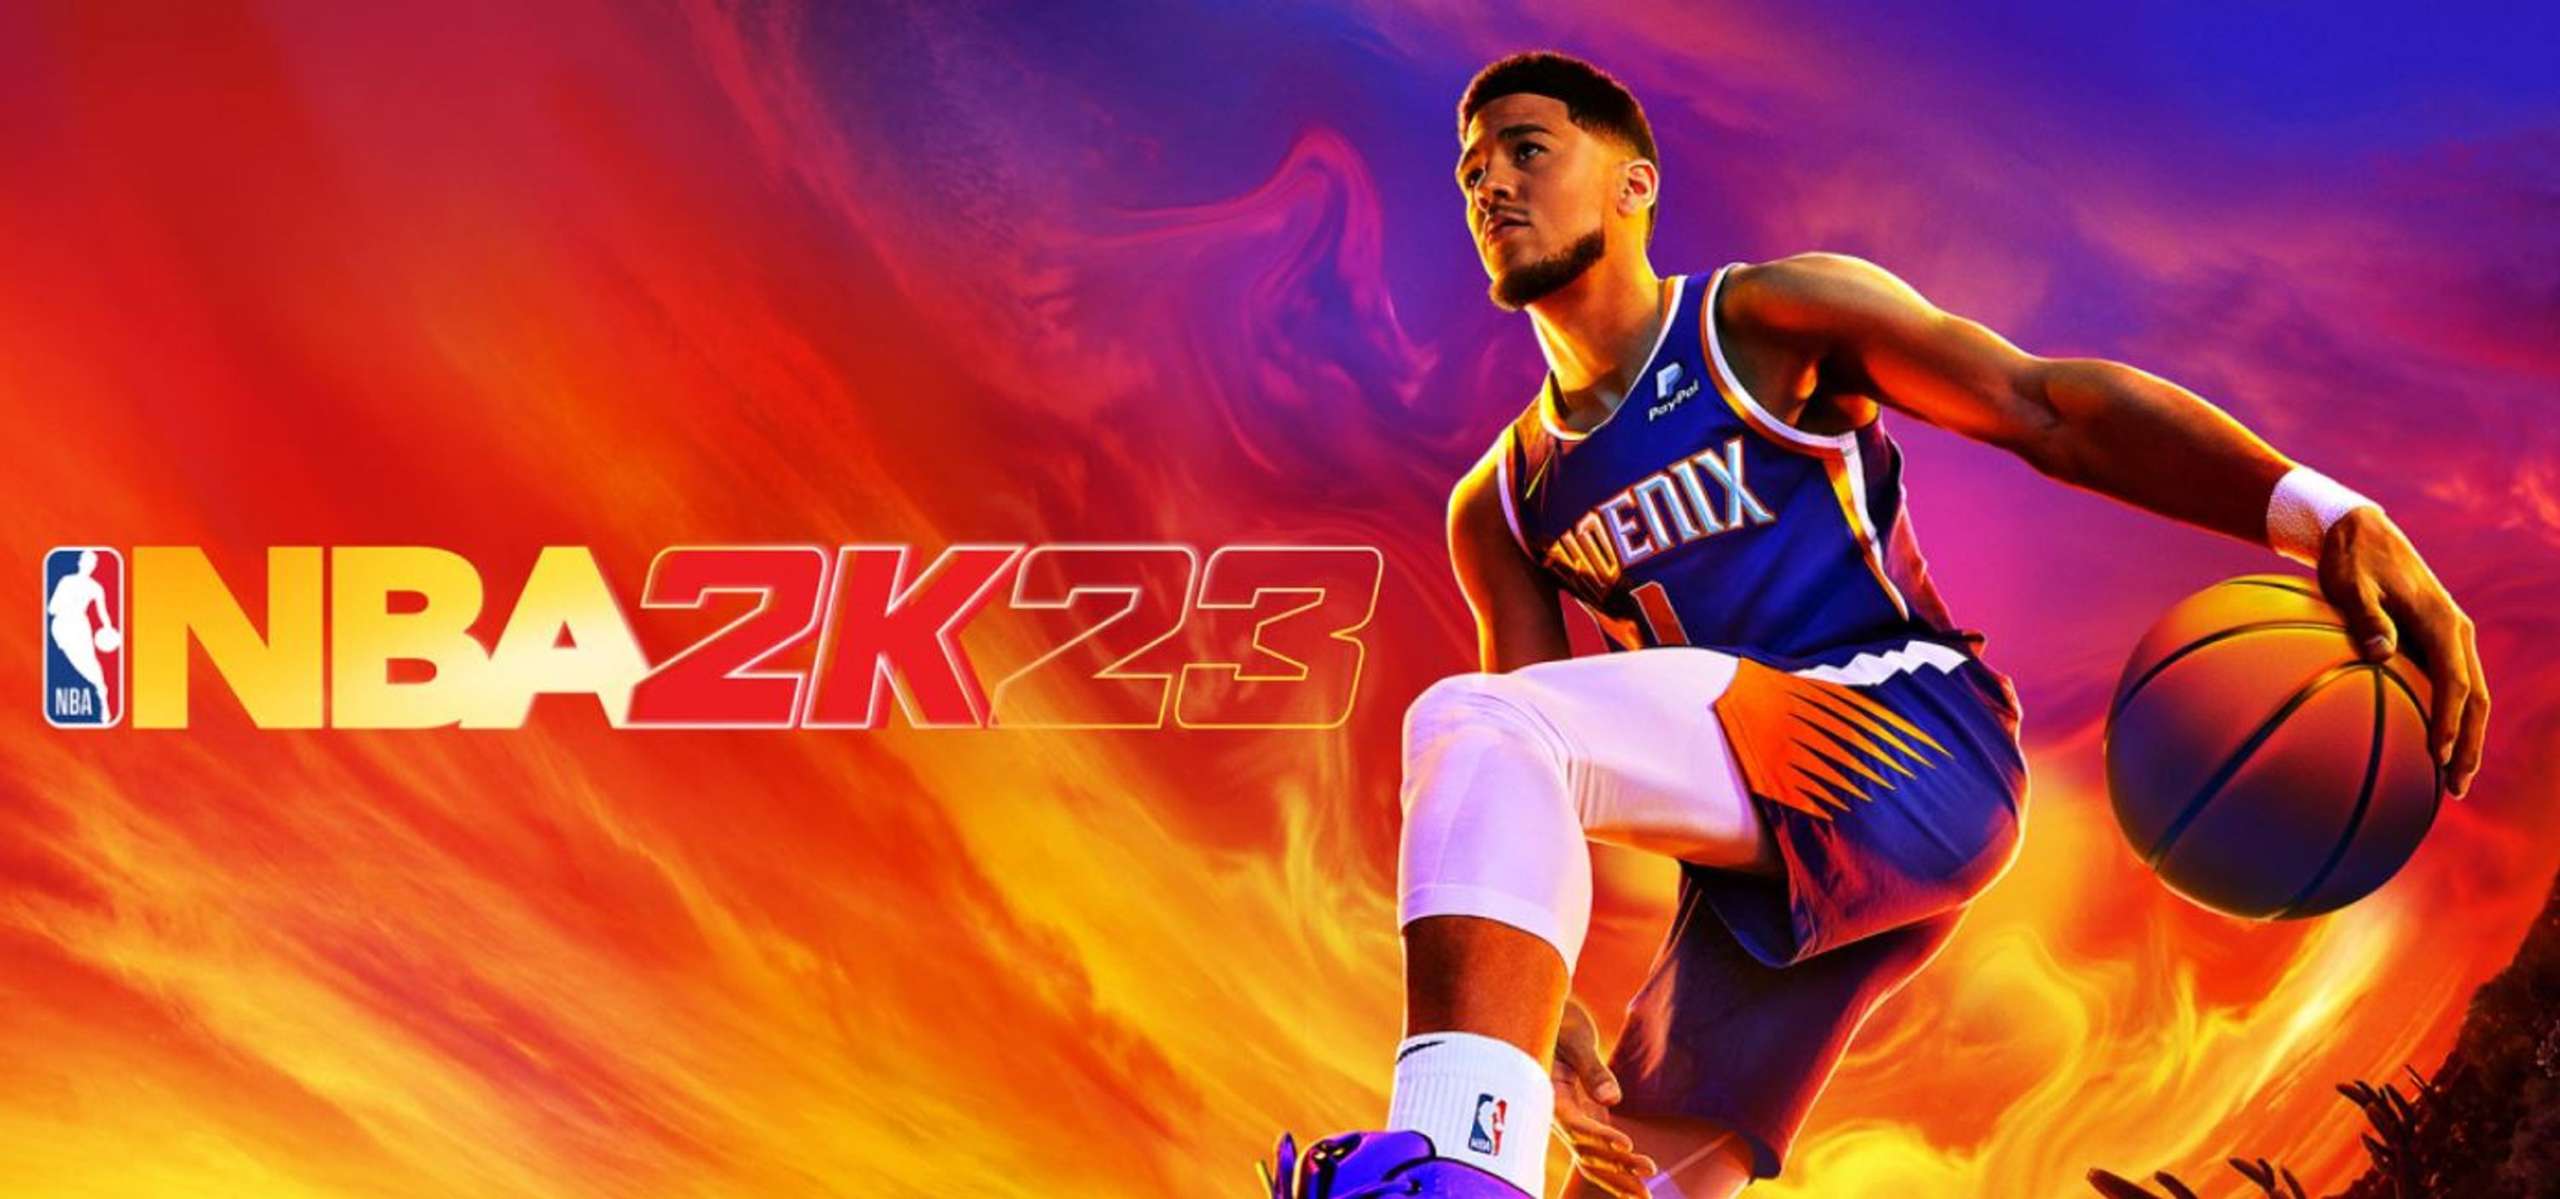 Publisher 2K Has Unveiled The Official Video For NBA 2K23, A Basketball Simulation Game Developed By Visual Concepts